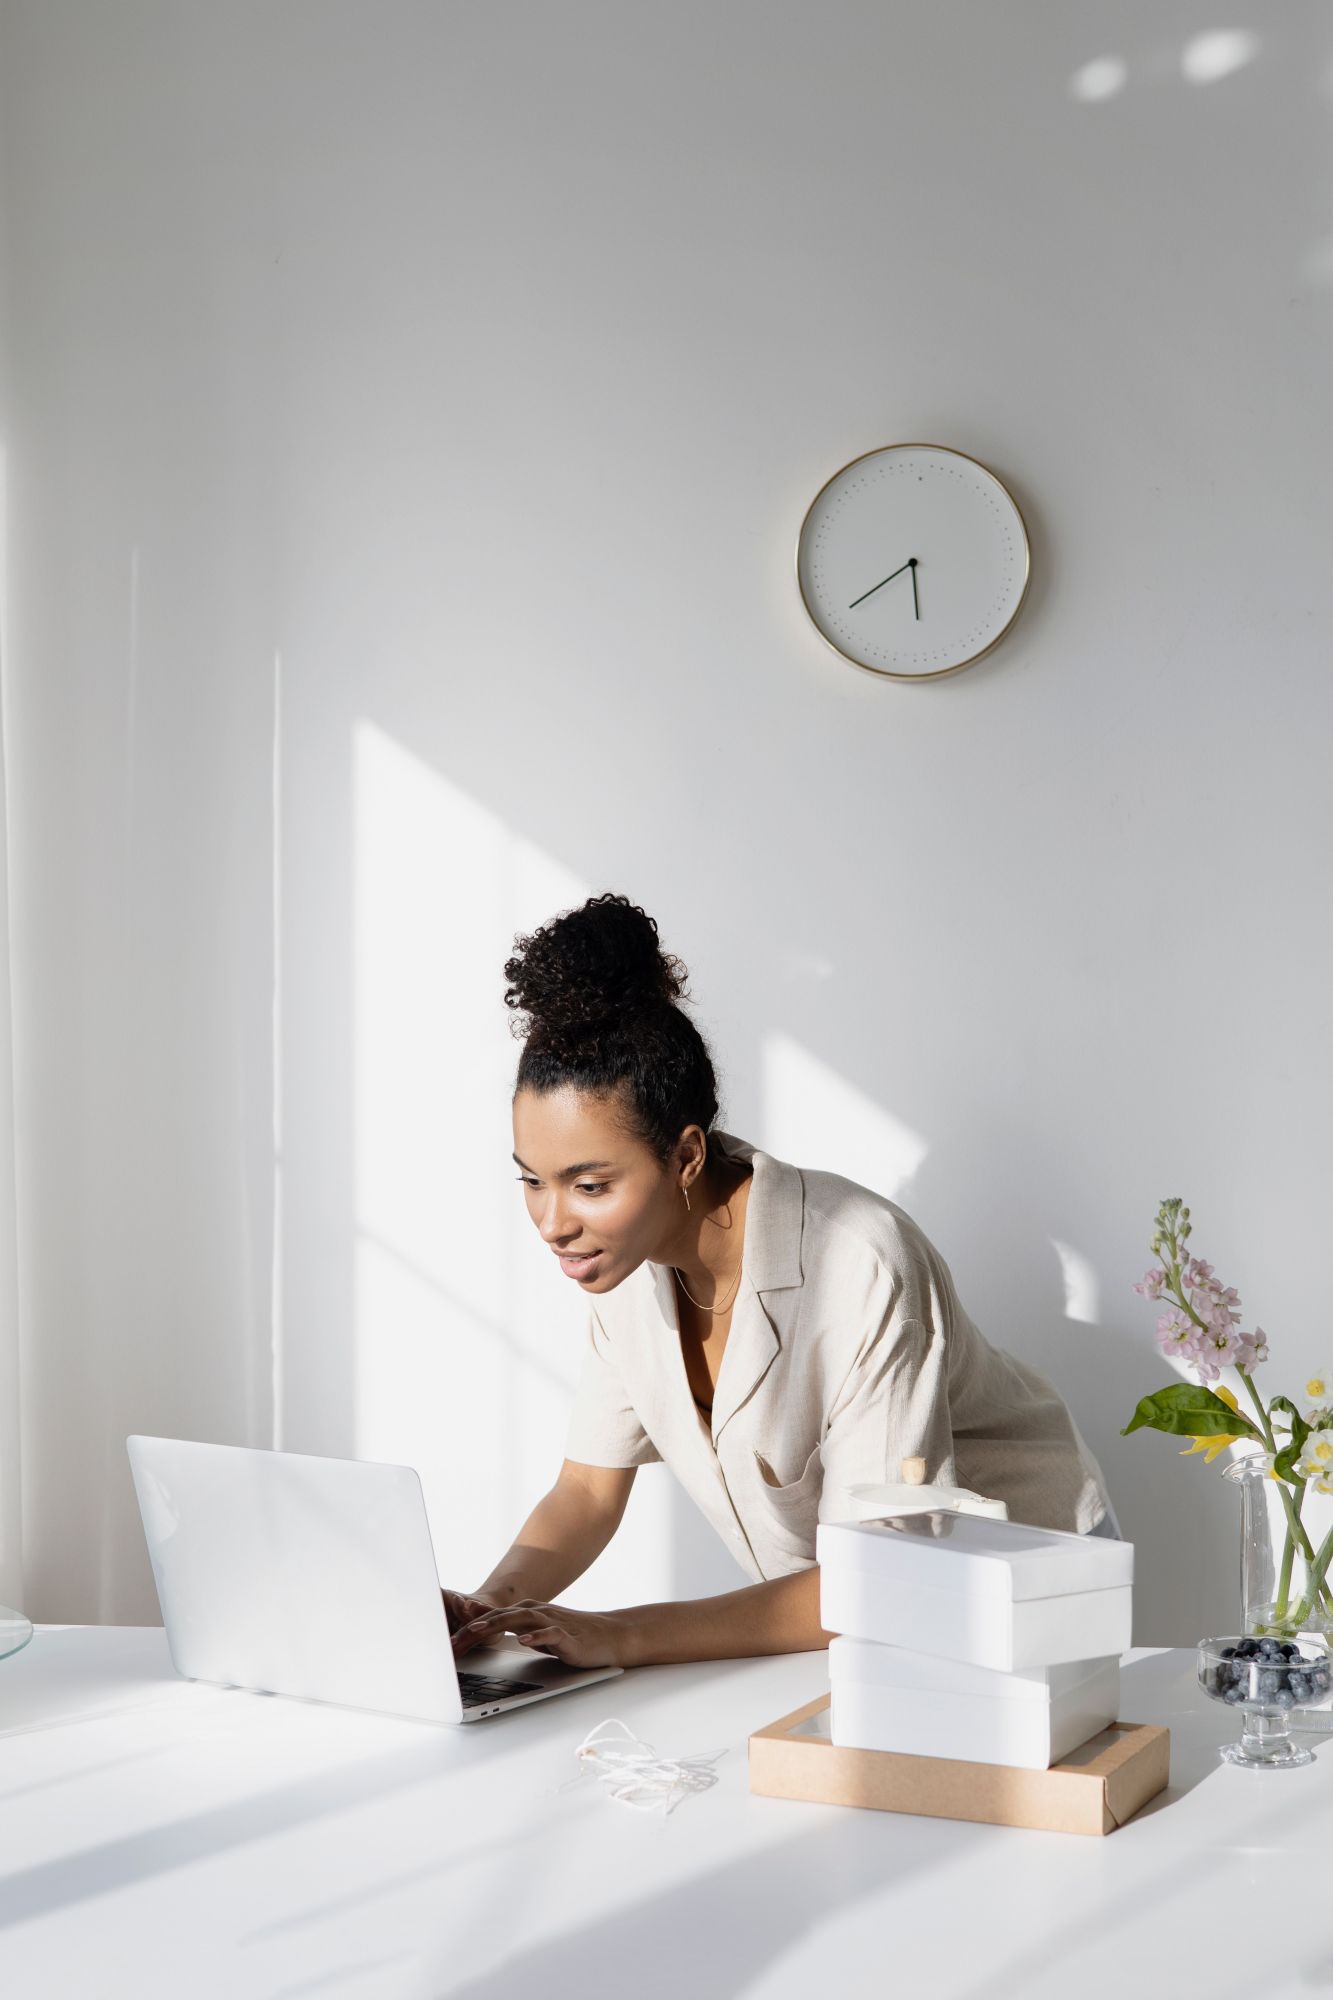 Woman looking down at her laptop in home office.